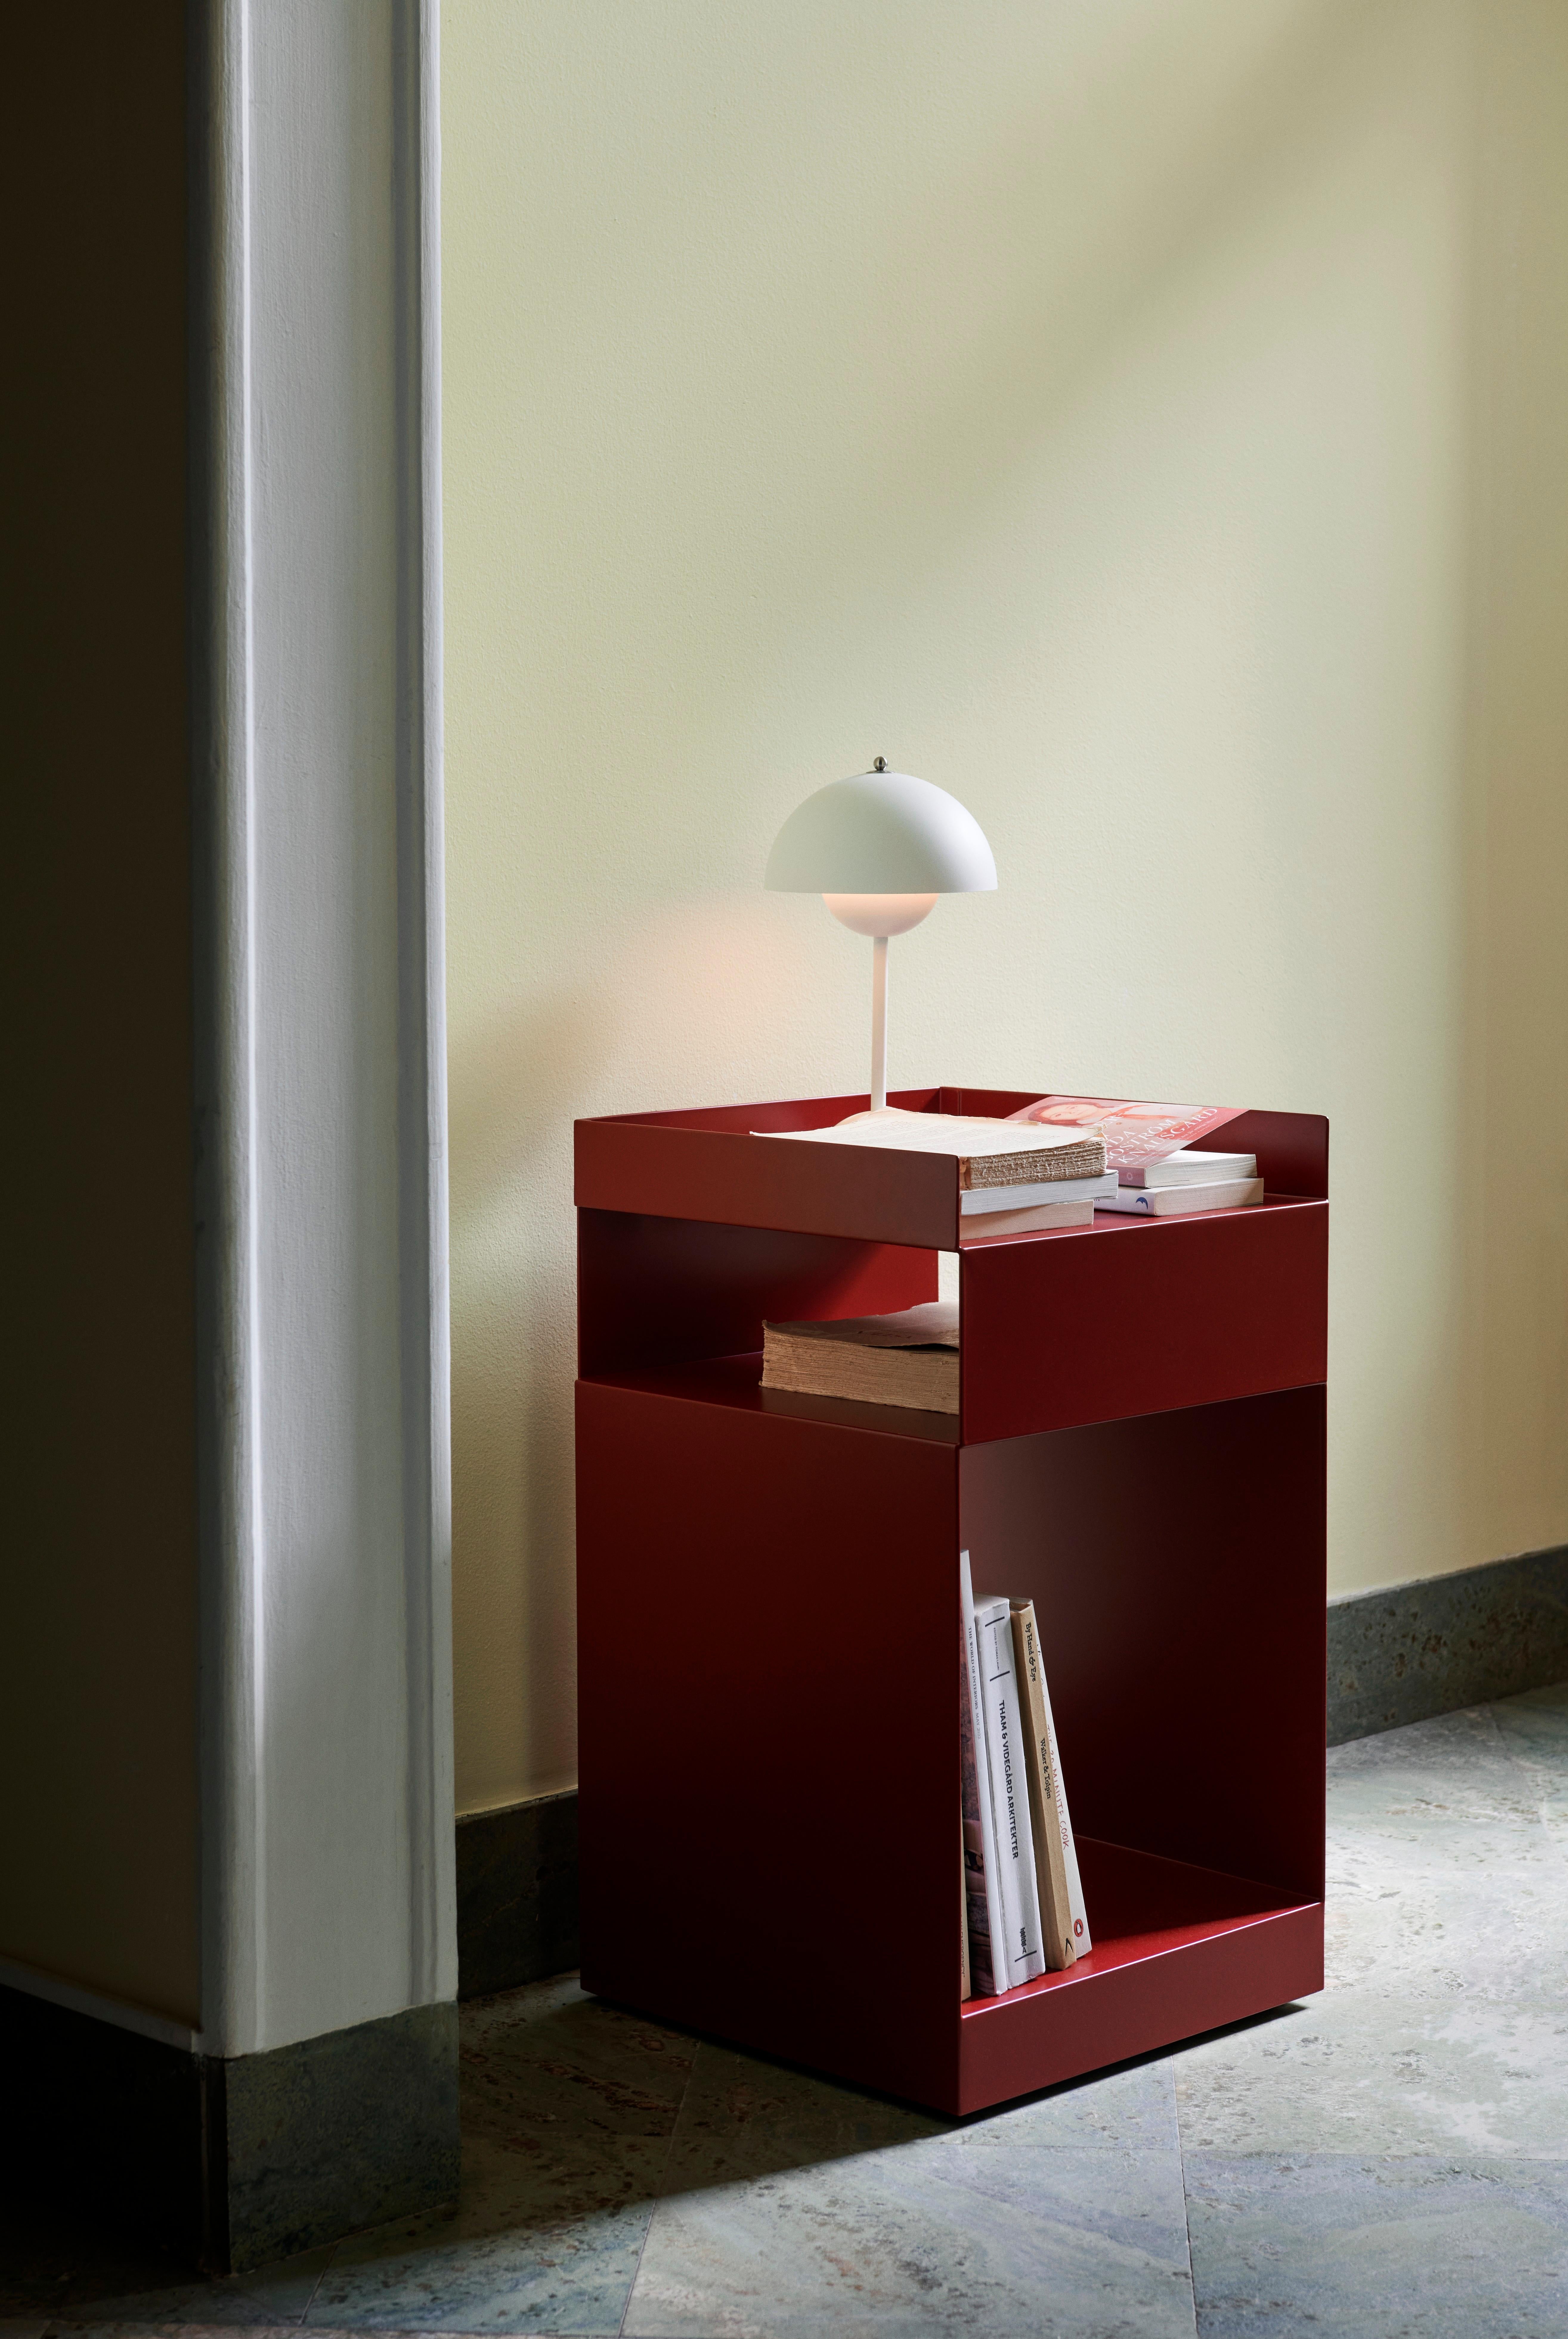 Rotate’s unassuming appearance belies its highly functional design. Created to fulfil a wide variety of purposes – from an office trolley, to a bedside table or bathroom storage unit – this asymmetrical piece can be inserted into any space. To